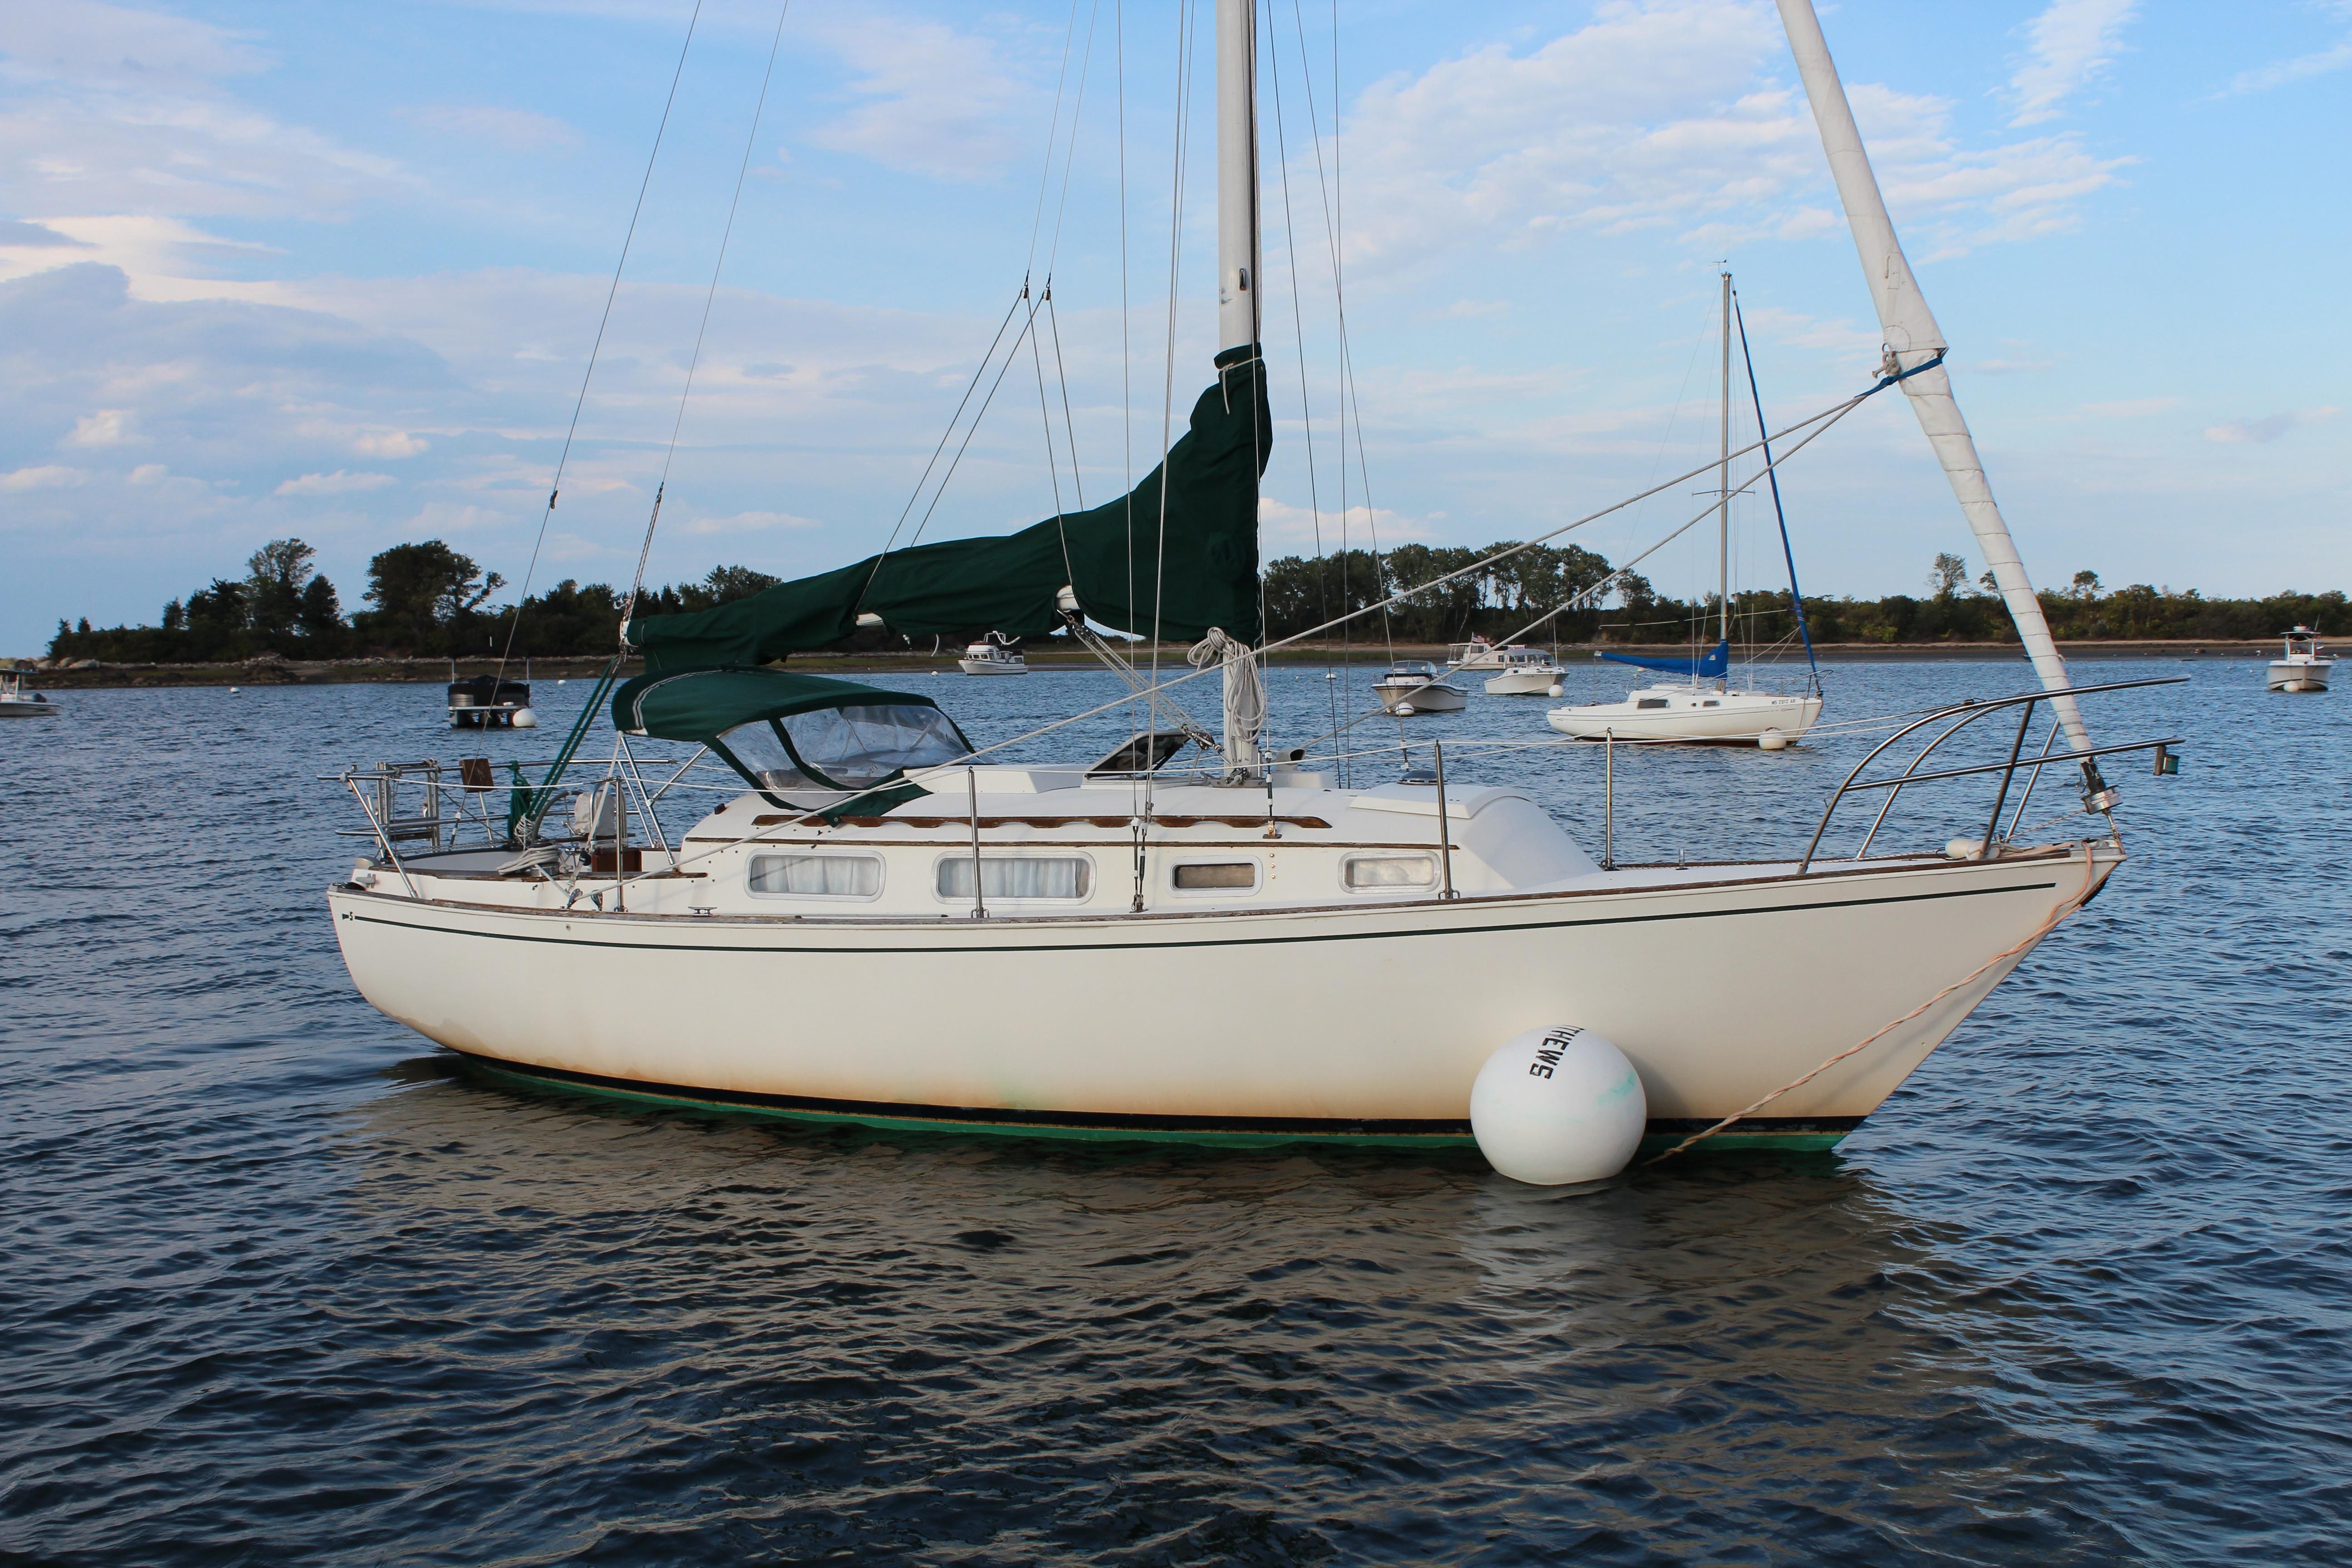 28 ft sailboats for sale